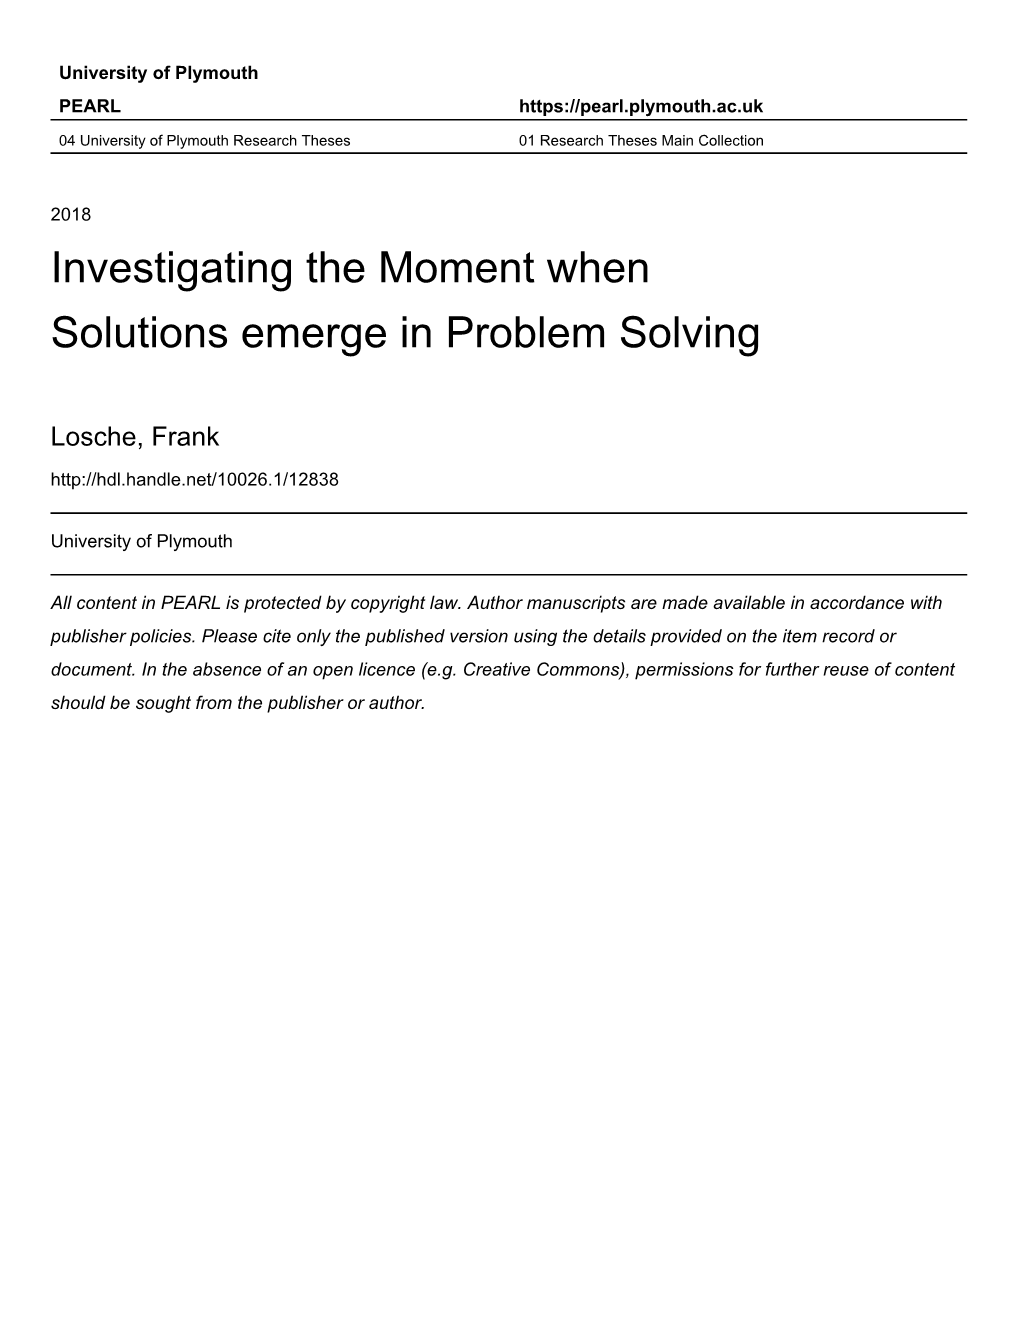 Investigating the Moment When Solutions Emerge in Problem Solving